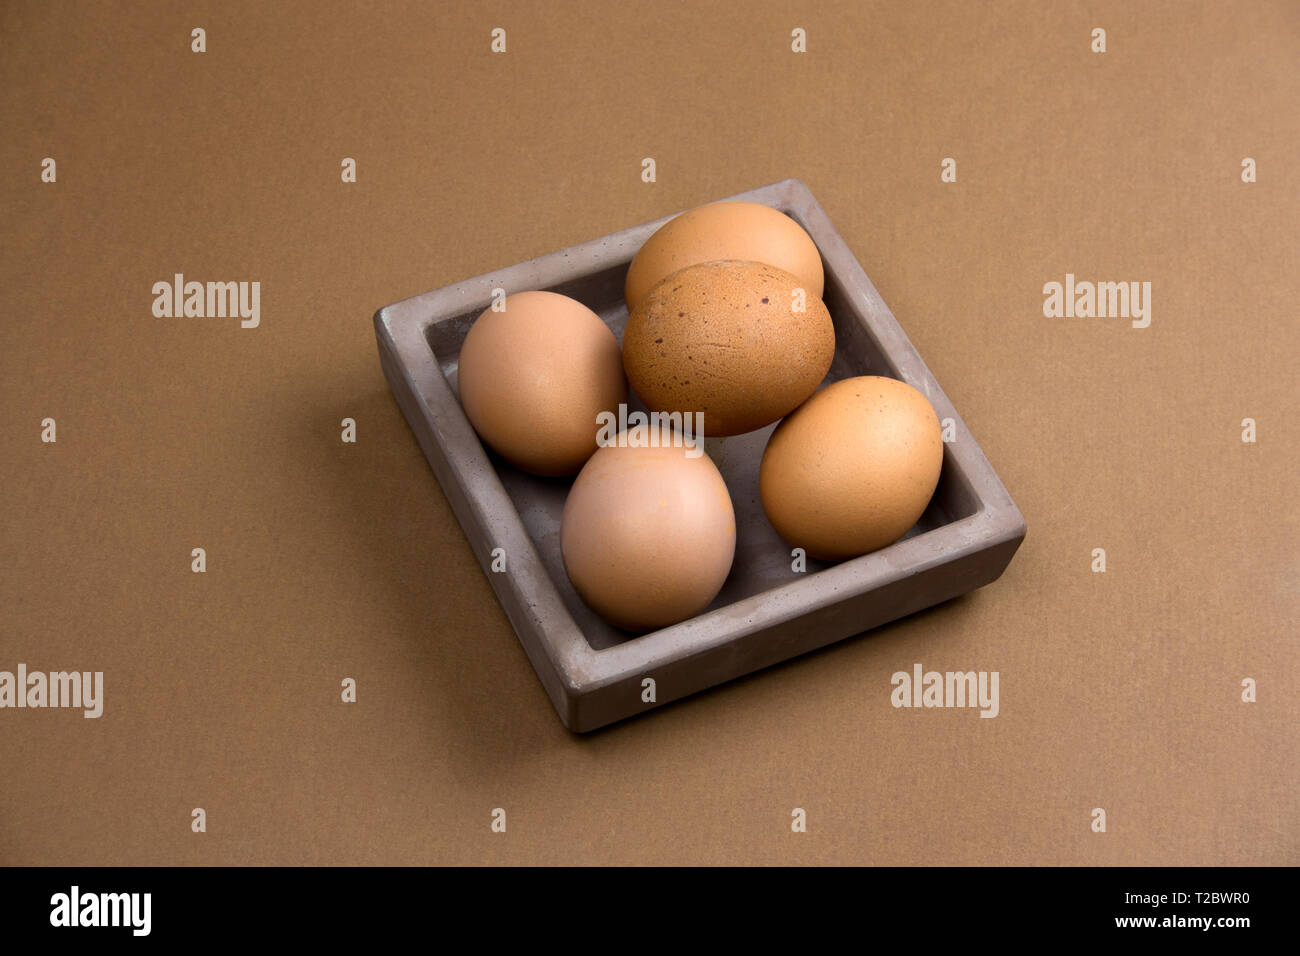 brown eggs in ceramic square plate on brown background Stock Photo